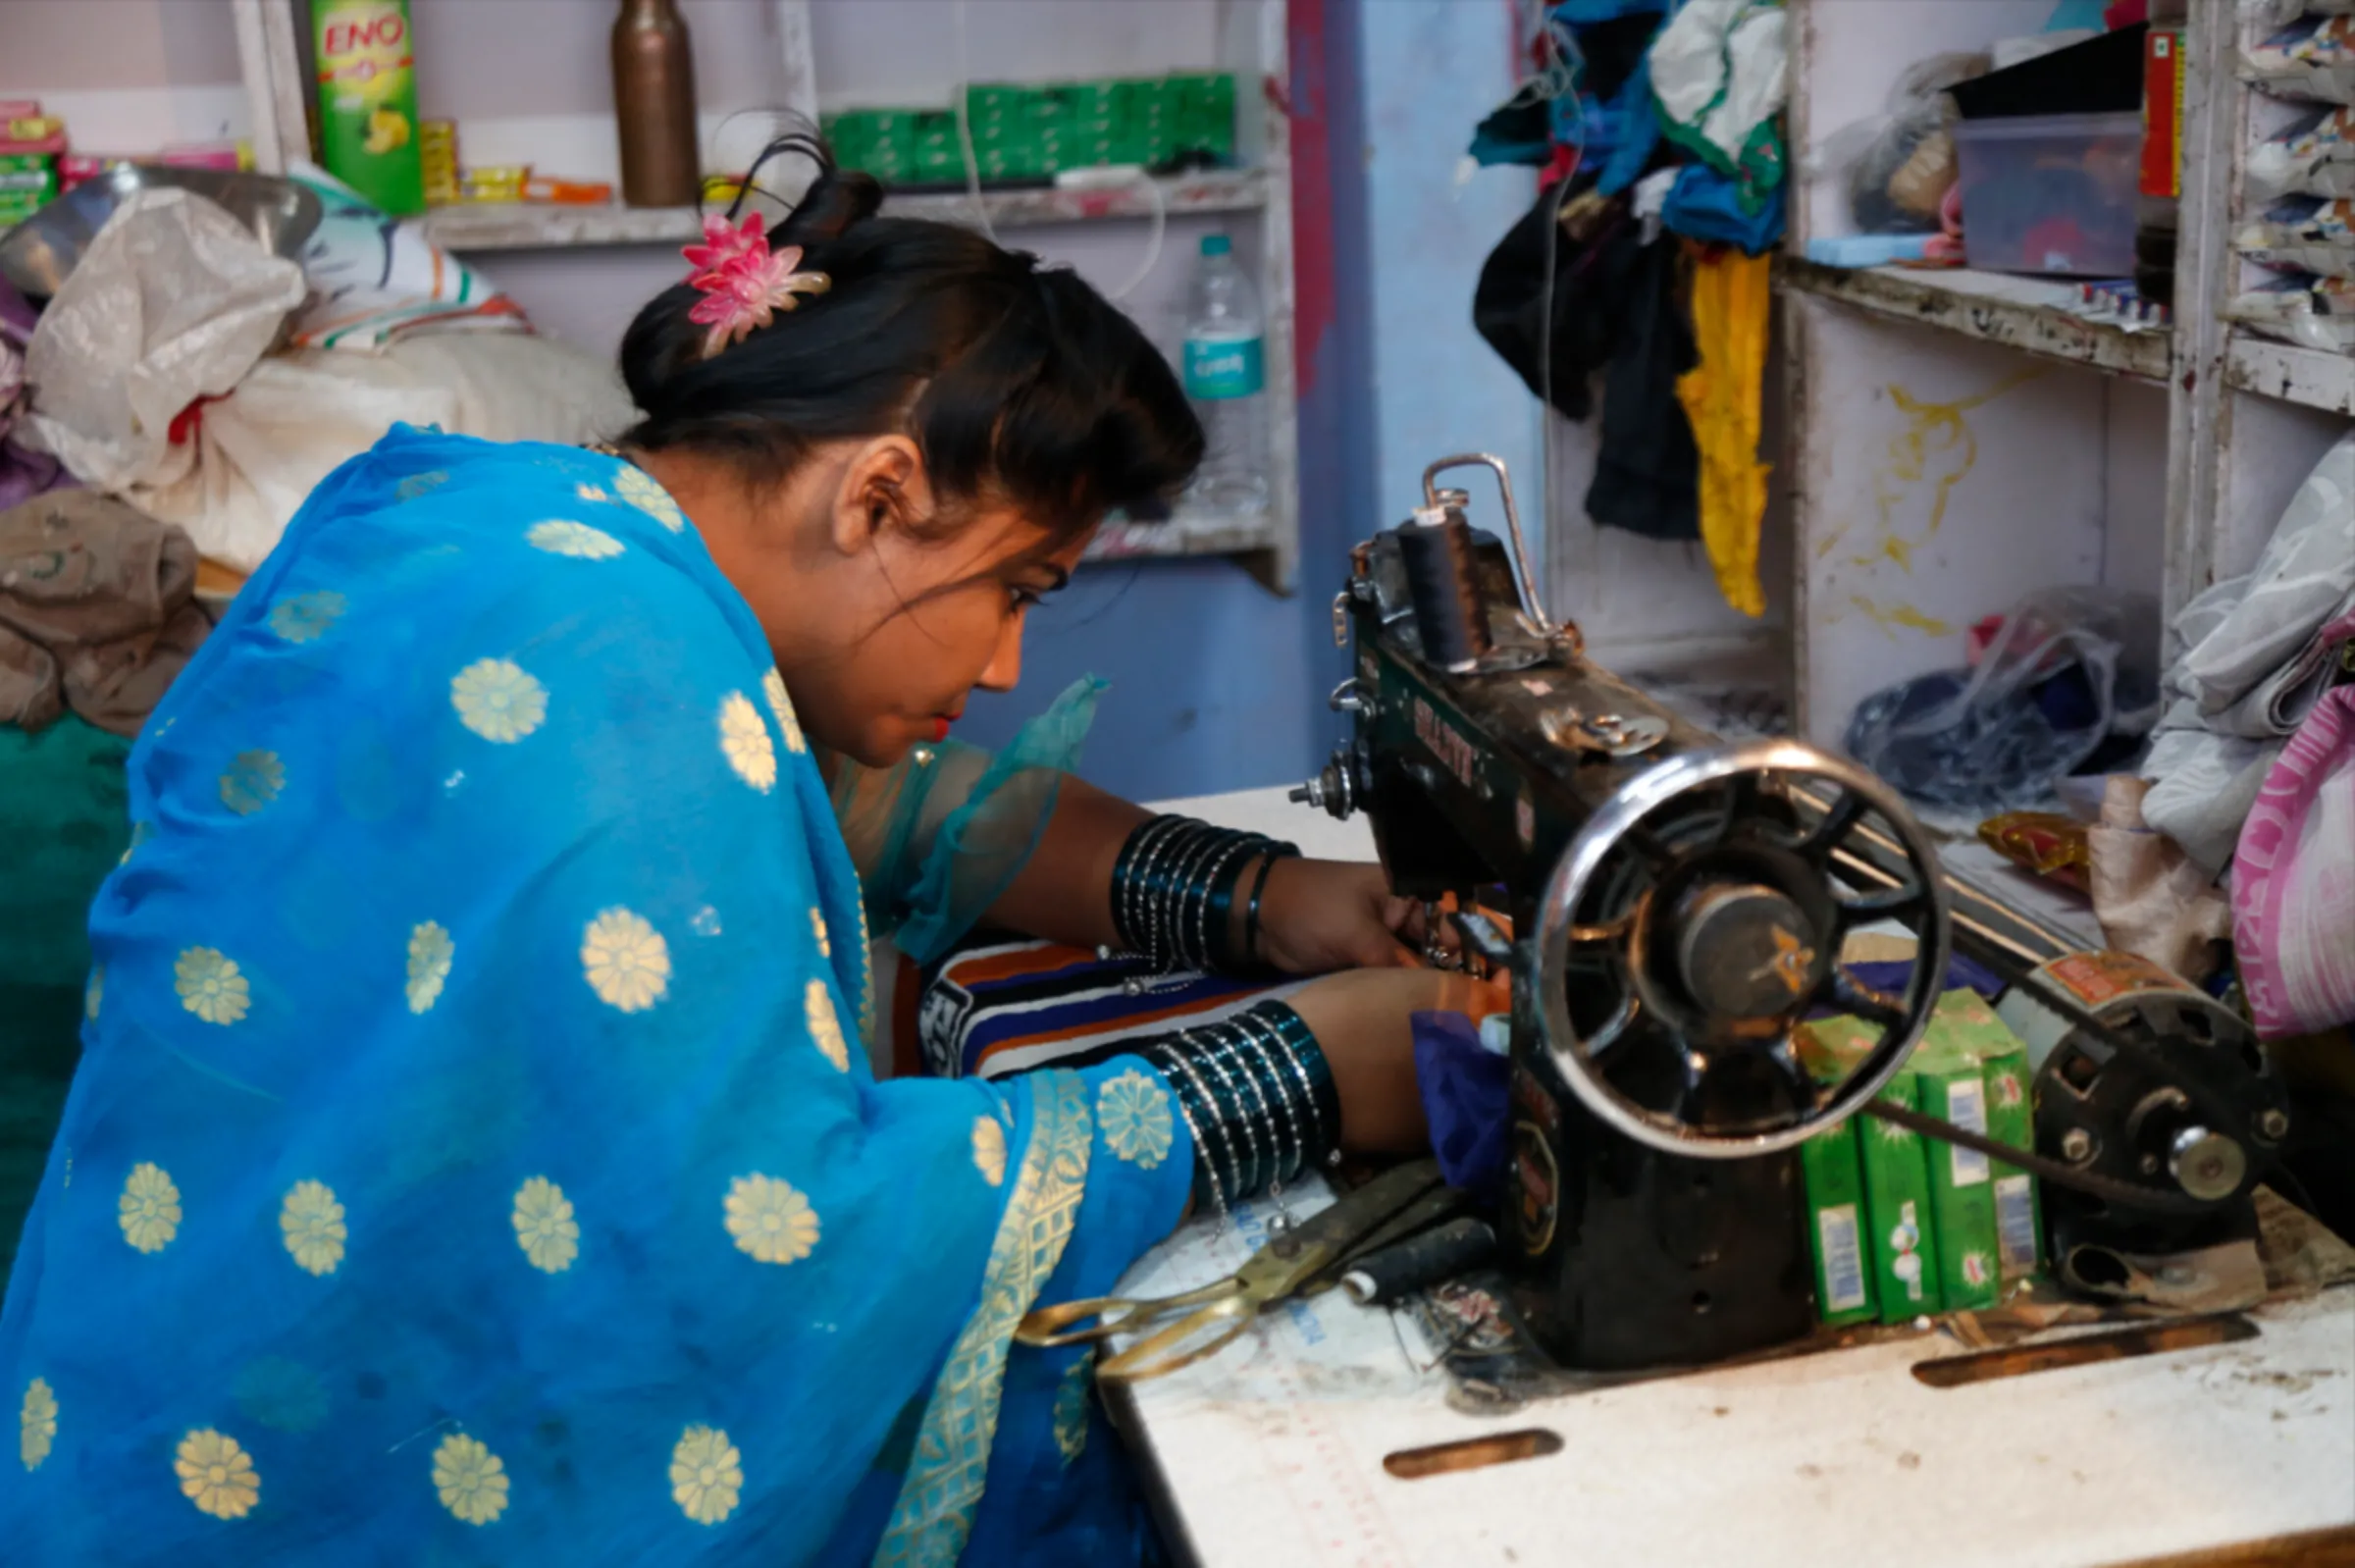 Mithilesh Yadav mends a shirt at her home-based tailor shop, which she started with the help of a microloan, in Bhopal, Madhya Pradesh, November 10, 2022